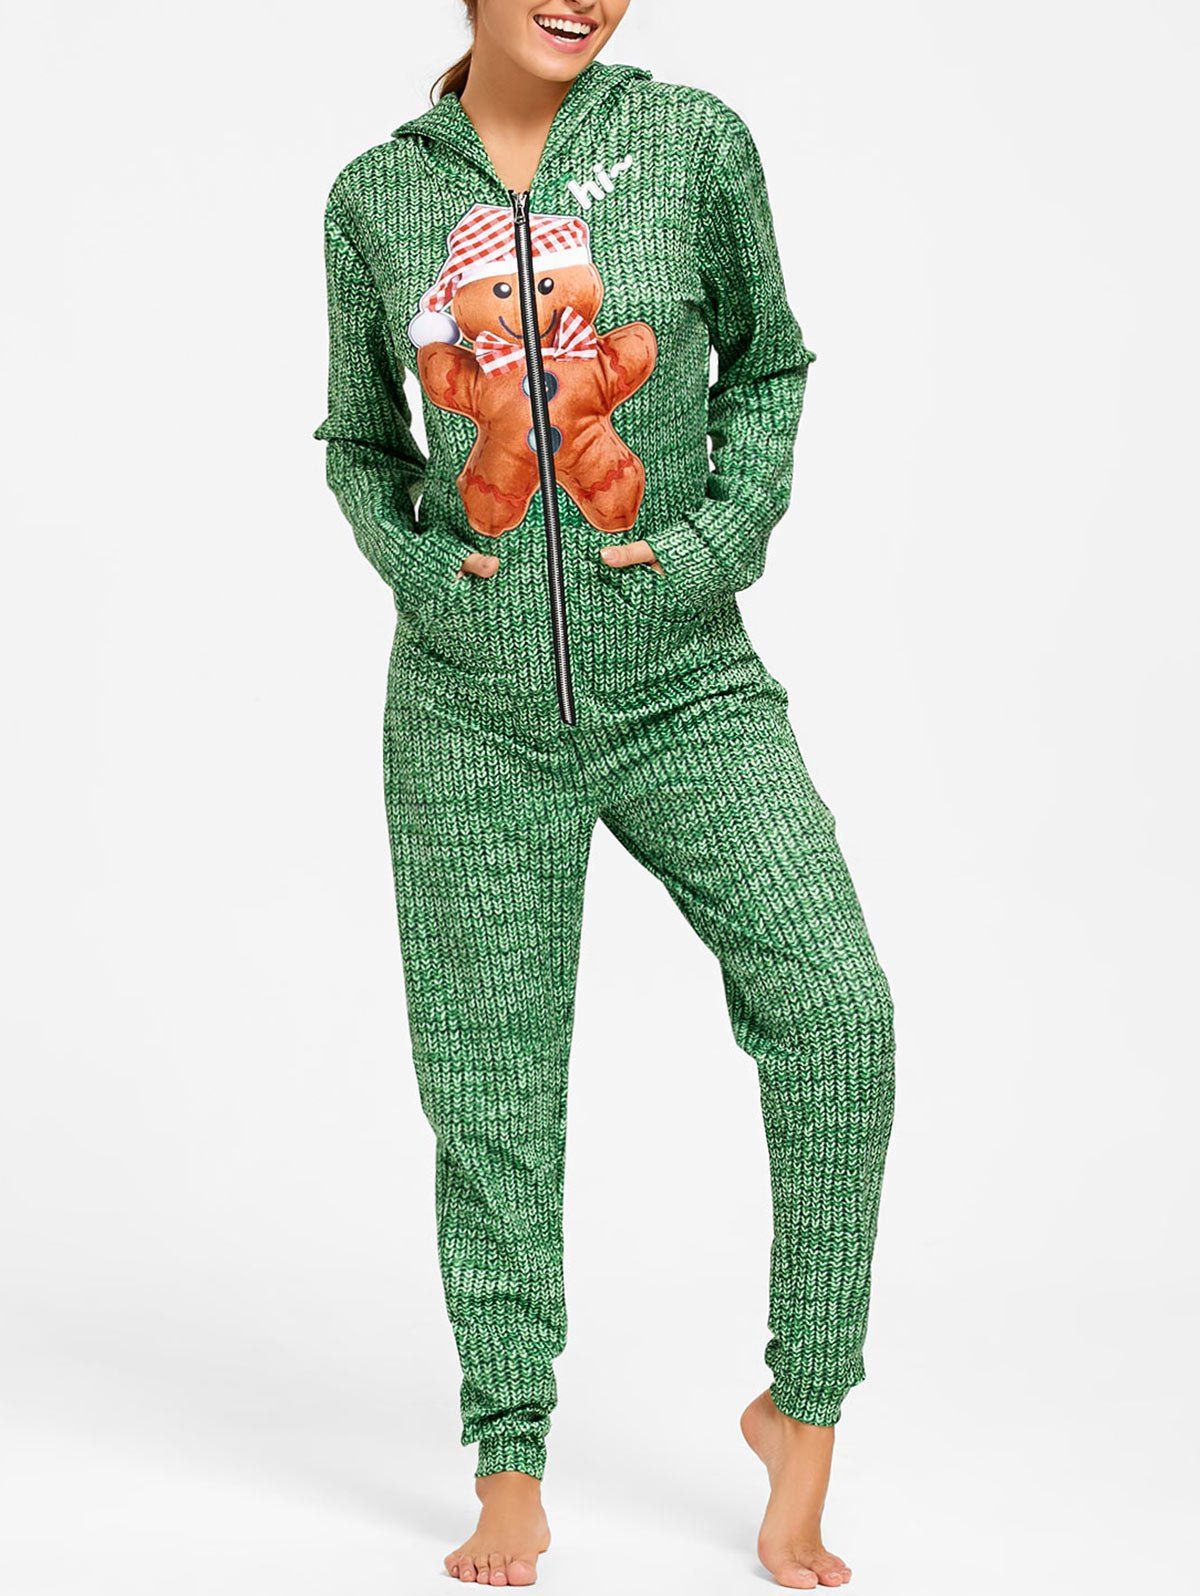 [37% OFF] Hooded One Piece Christmas Pajama | Rosegal